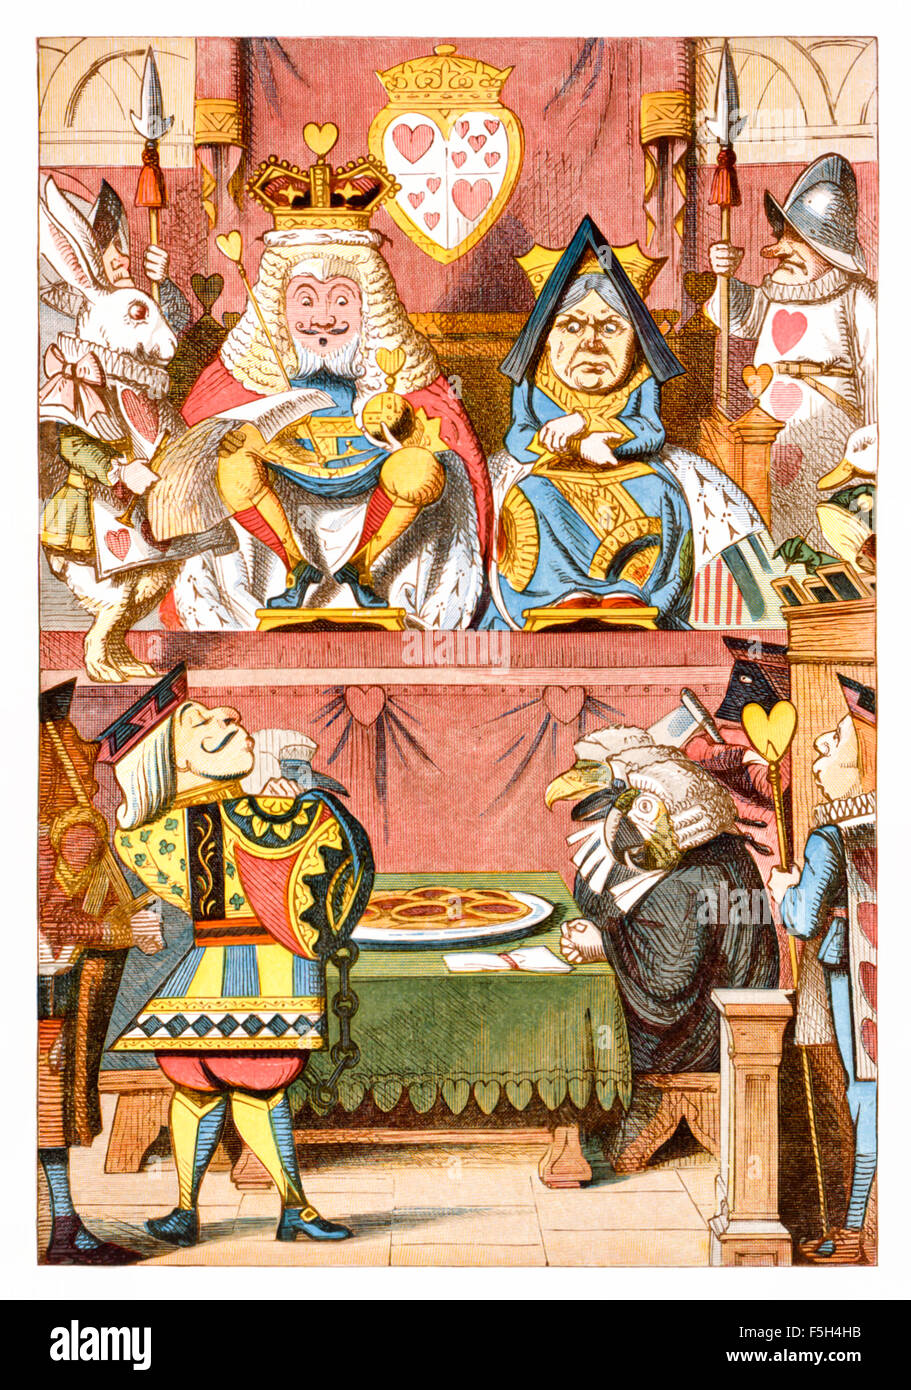 Frontispiece showing the court scene with King and Queen of Hearts presiding, from 'The Nursery “Alice'', an shortened adaptation of ‘Alice’s Adventures in Wonderland’ aimed at under-fives written by Lewis Carroll (1832-1898) himself. This edition contains 20 selected illustrations by Sir John Tenniel (1820-1914) from the original book which were enlarged and coloured by Emily Gertrude Thomson (1850-1929). See description for more information. Stock Photo